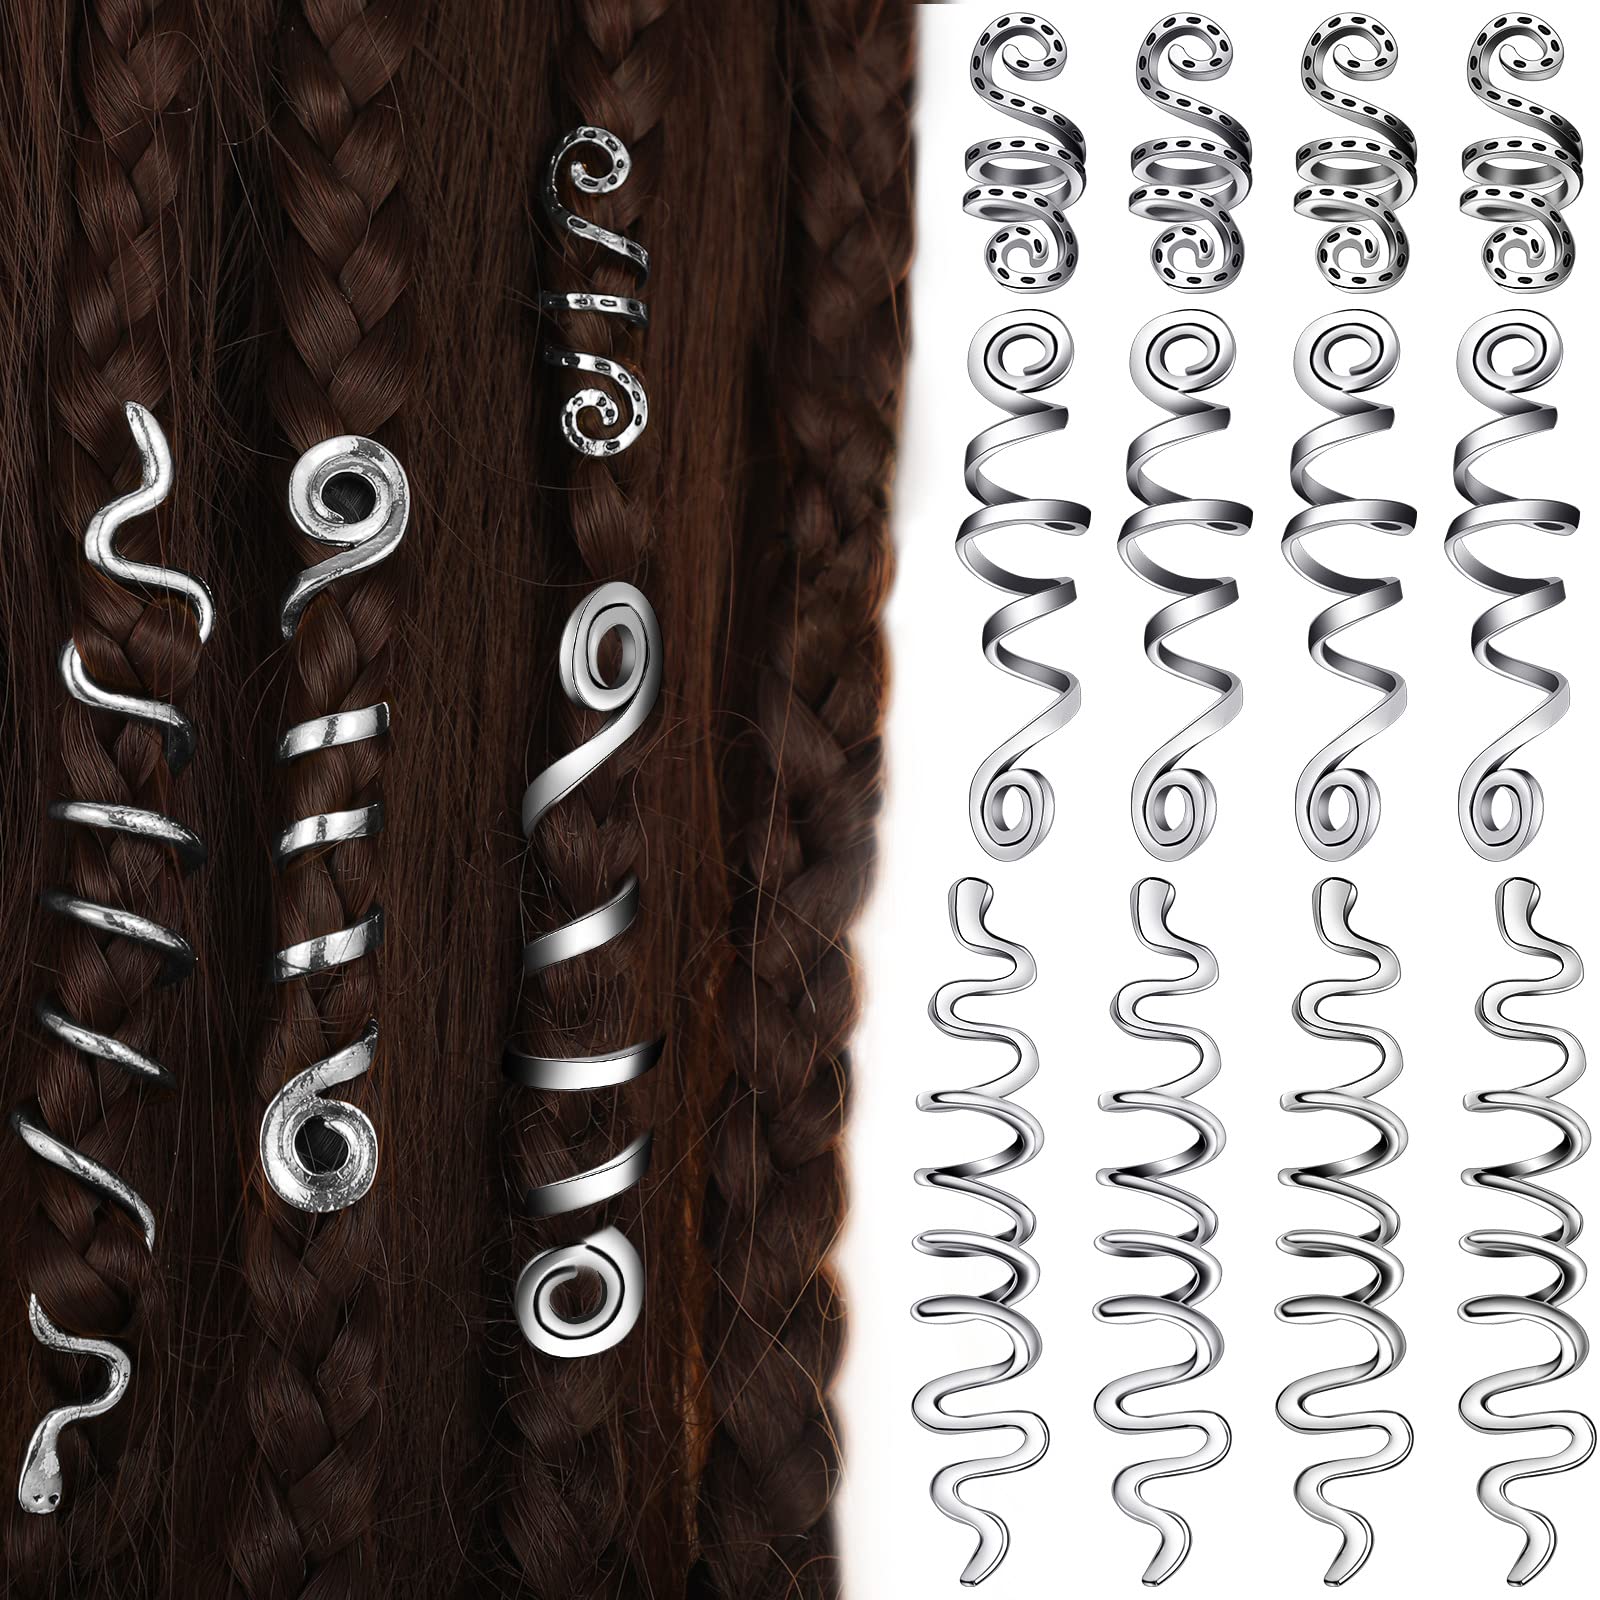 12 Pieces Braid Hair Accessories Celtic Hair Jewelry Alloy Dreadlock  Accessories Loc Jewelry for Hair Spiral